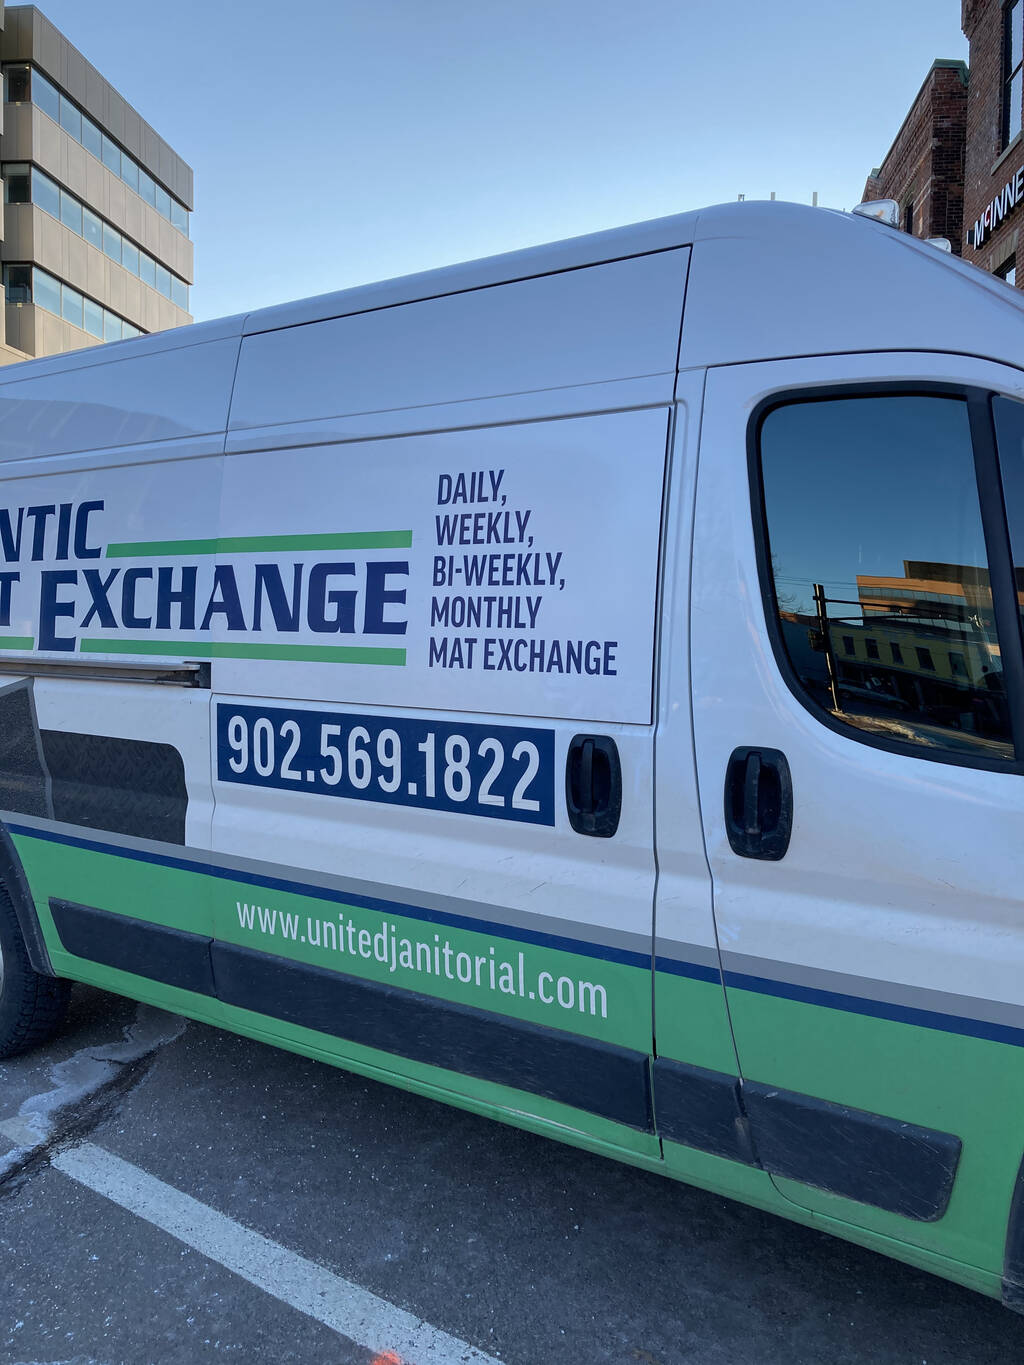 Photo of an Atlantic Mat Exchange van, with "Daily, Weekly, Bi-Weekly, Monthly Mat Exchange" lettered on the side.